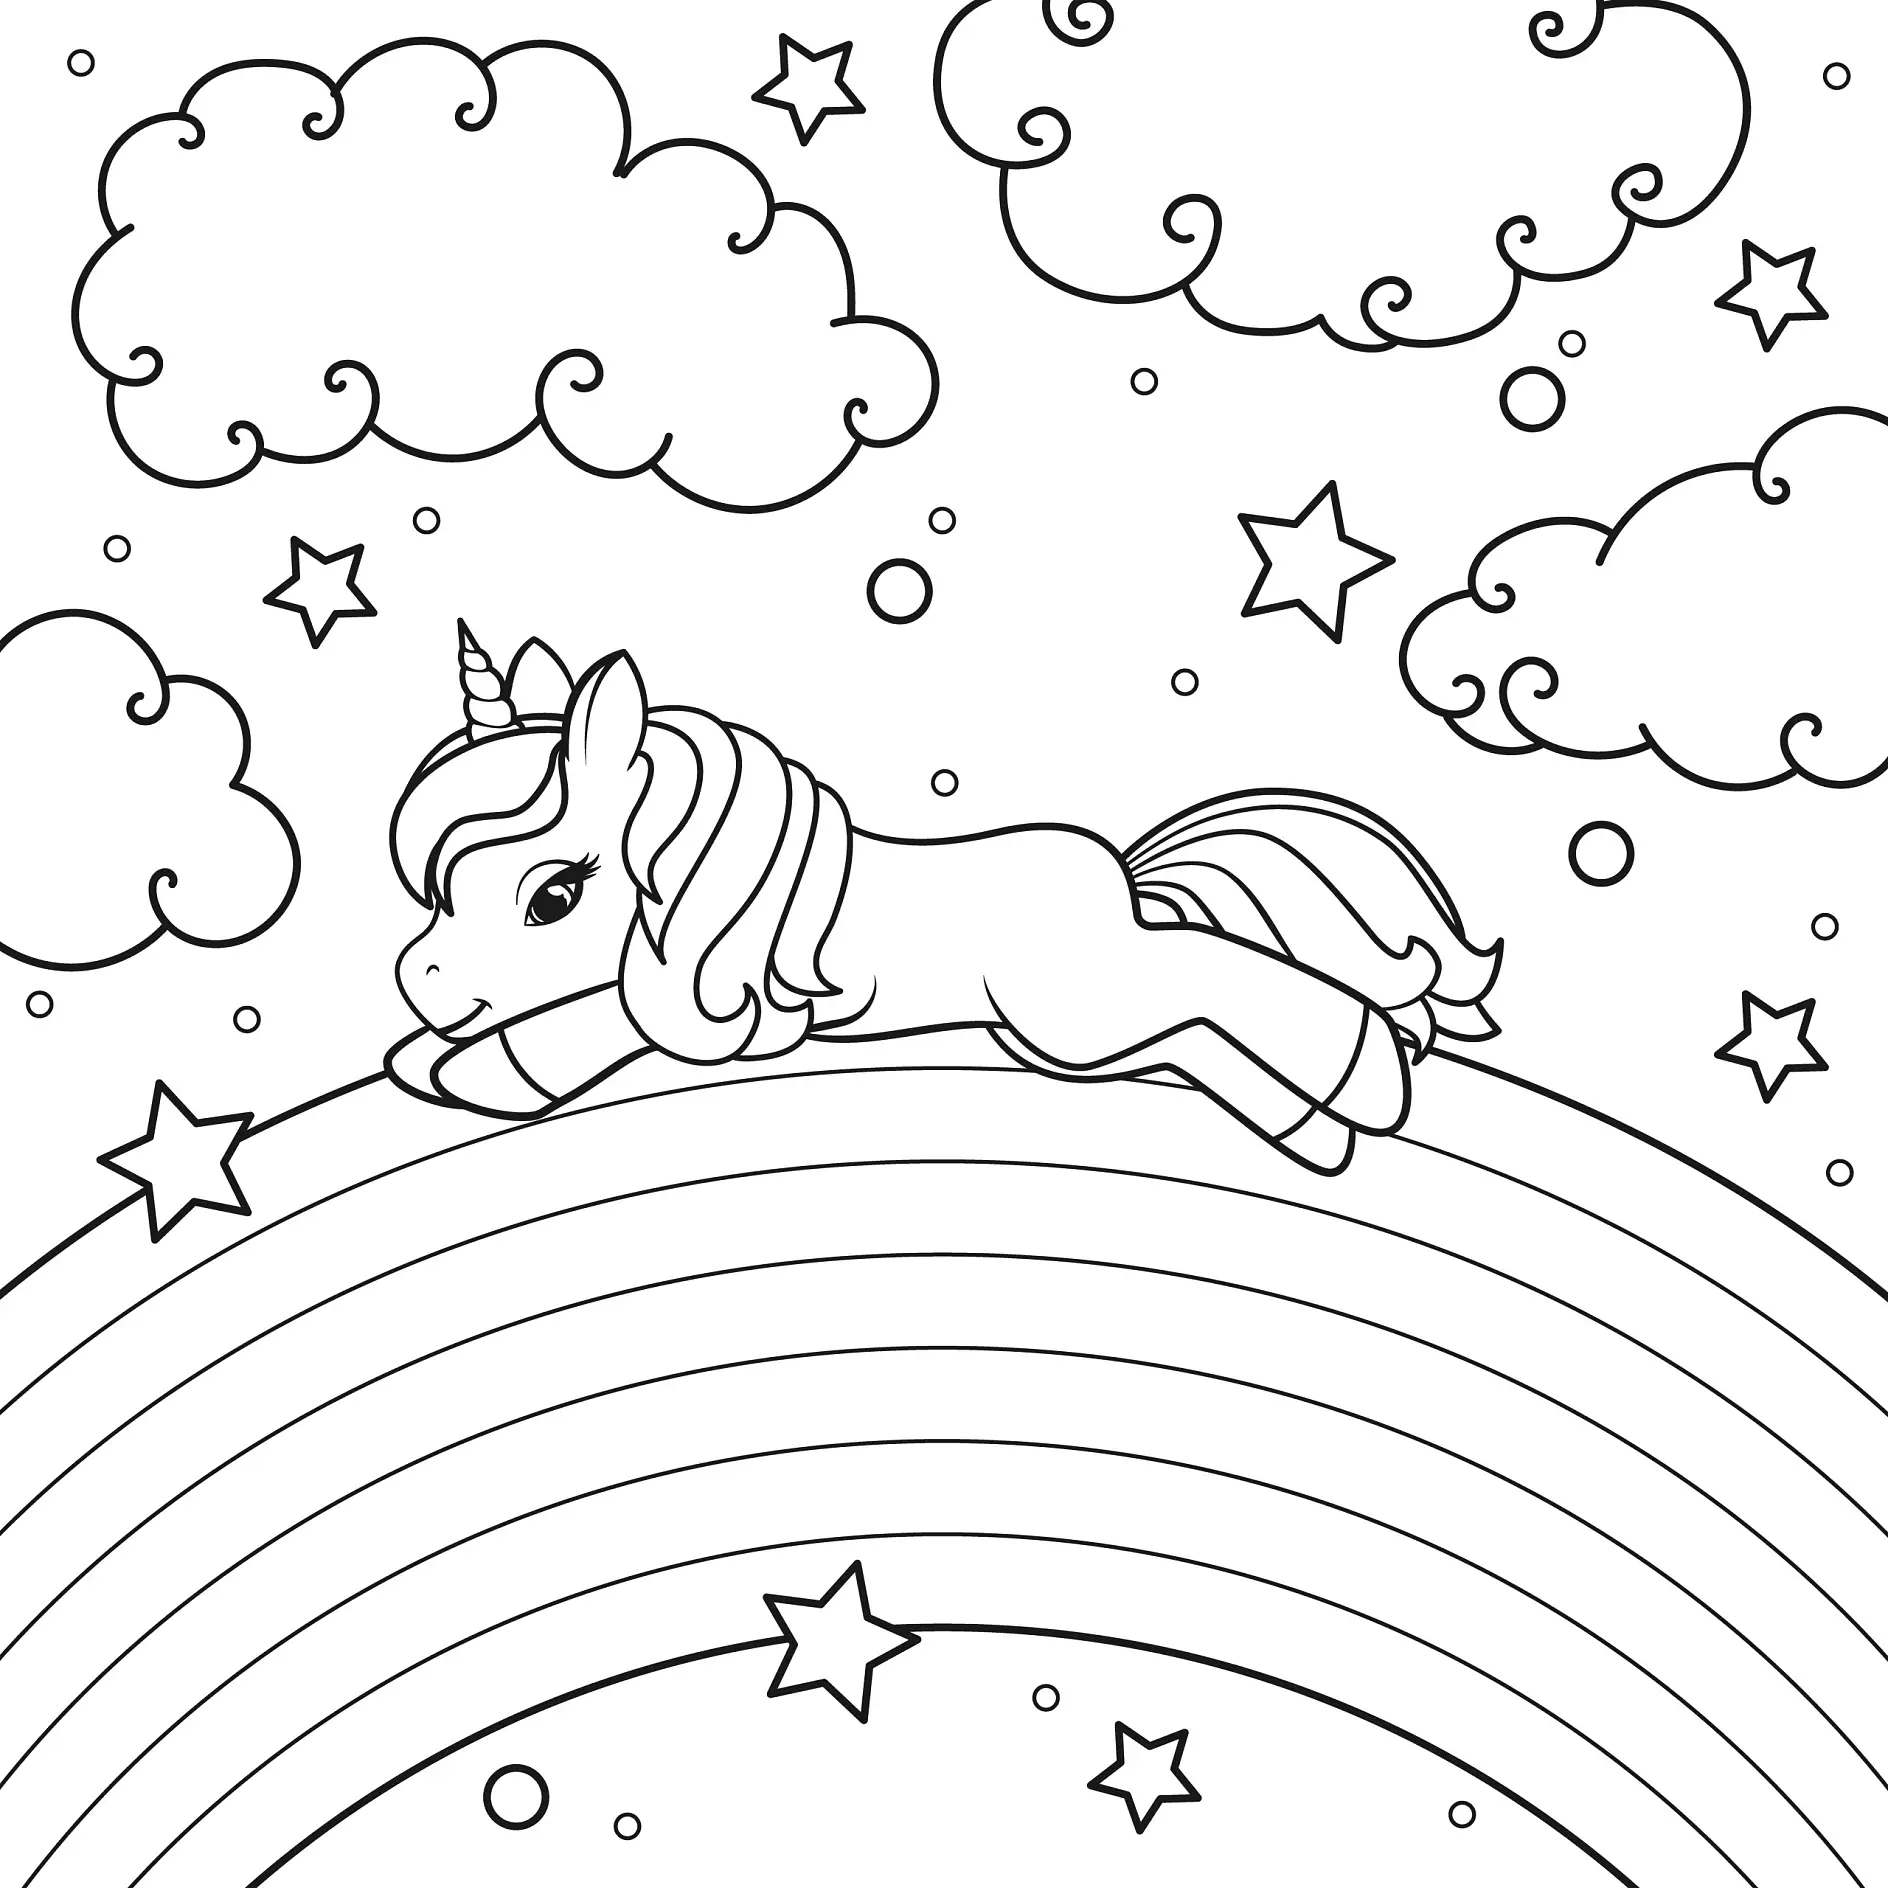 The unicorn lies on the rainbow against the background of the starry sky. Coloring book page. Illustration on transparent background